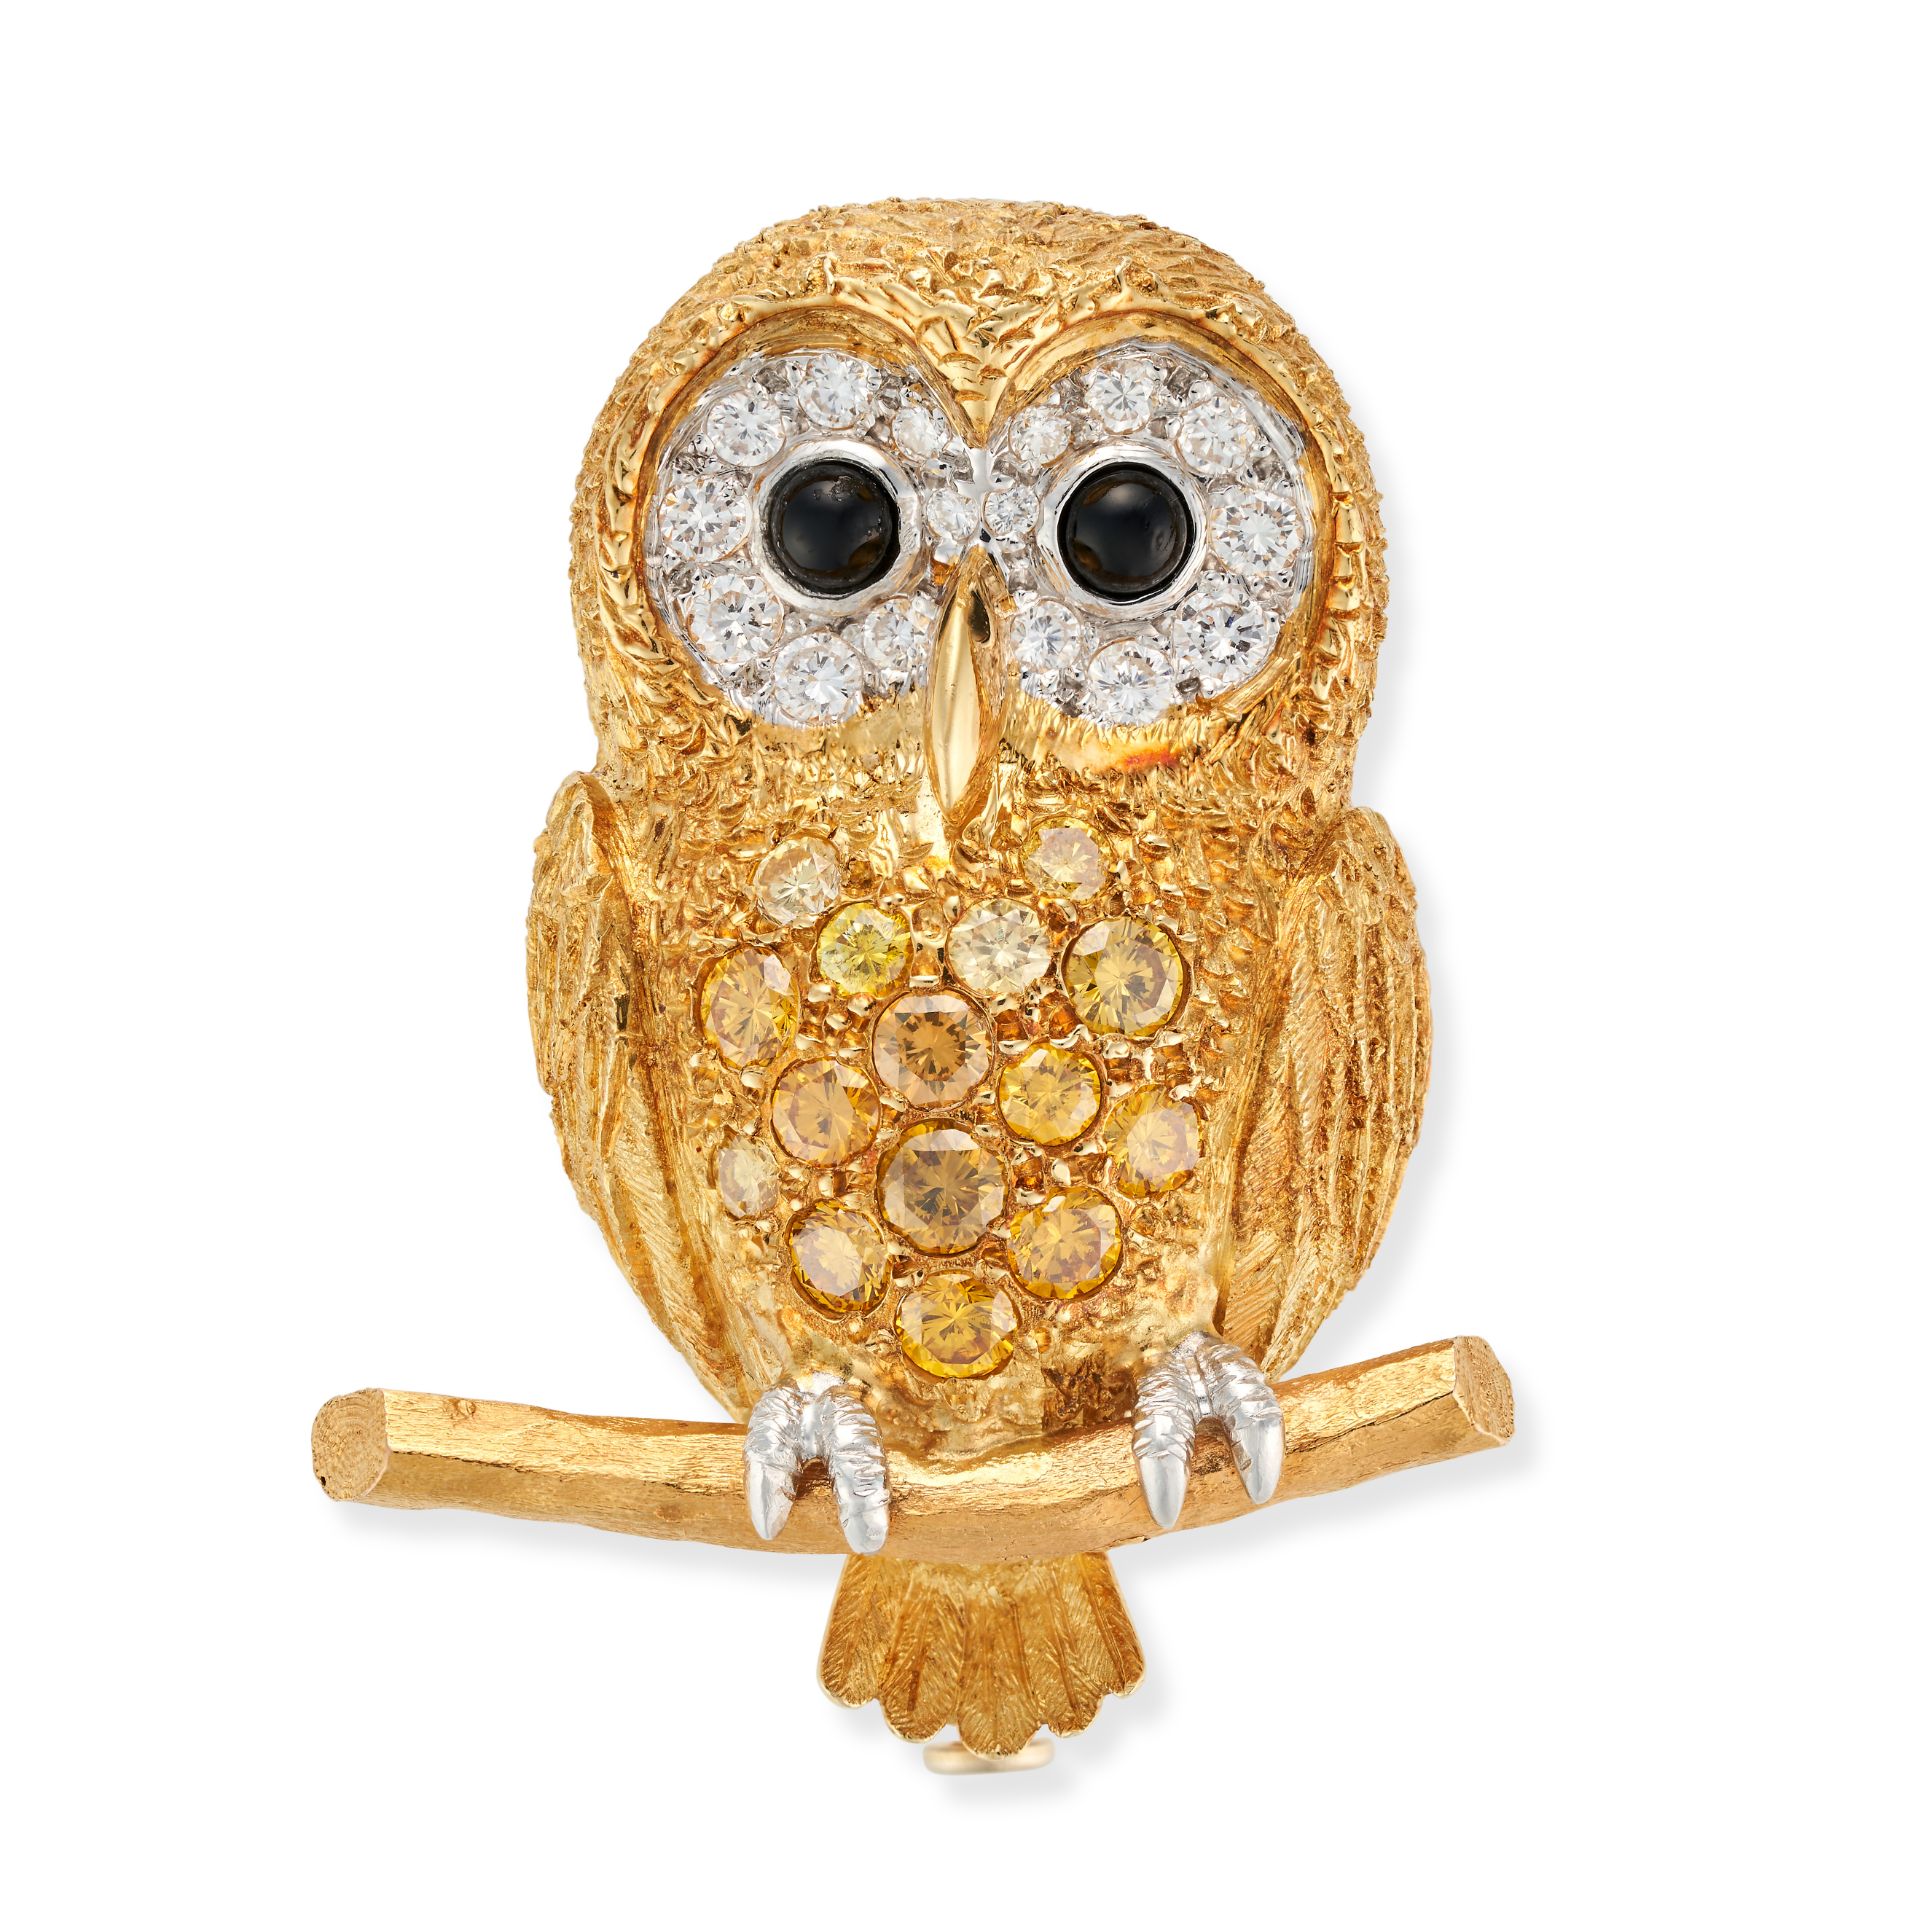 E WOLFE & CO., A YELLOW DIAMOND AND SAPPHIRE OWL BROOCH in 18ct yellow gold, designed as an owl p...